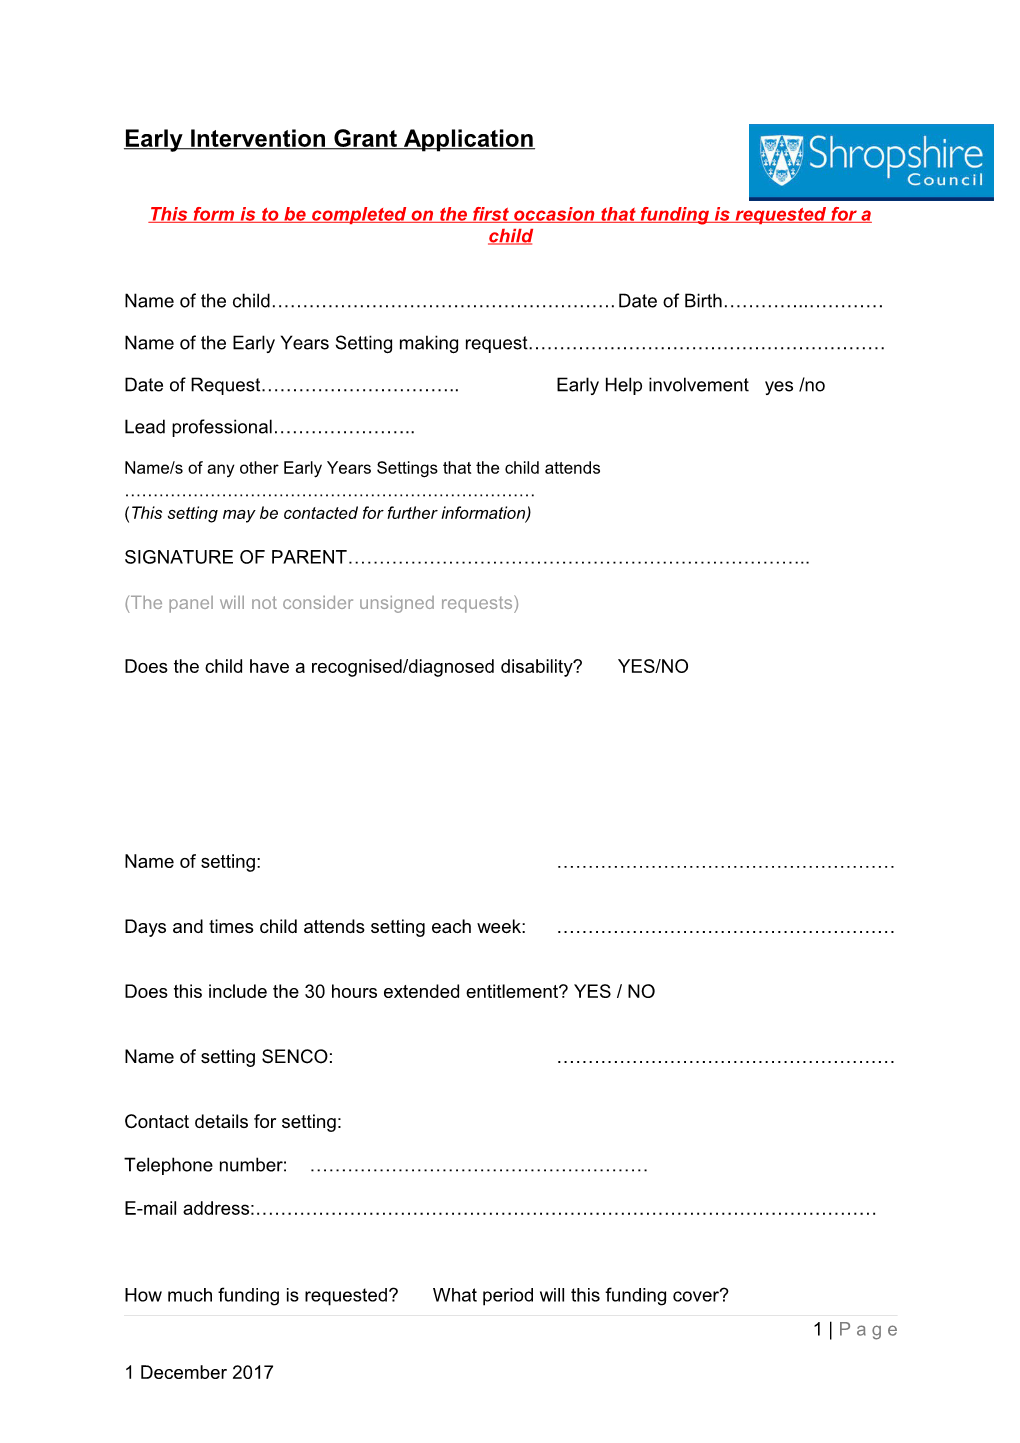 This Form Is to Be Completed on the First Occasion That Funding Is Requested for a Child